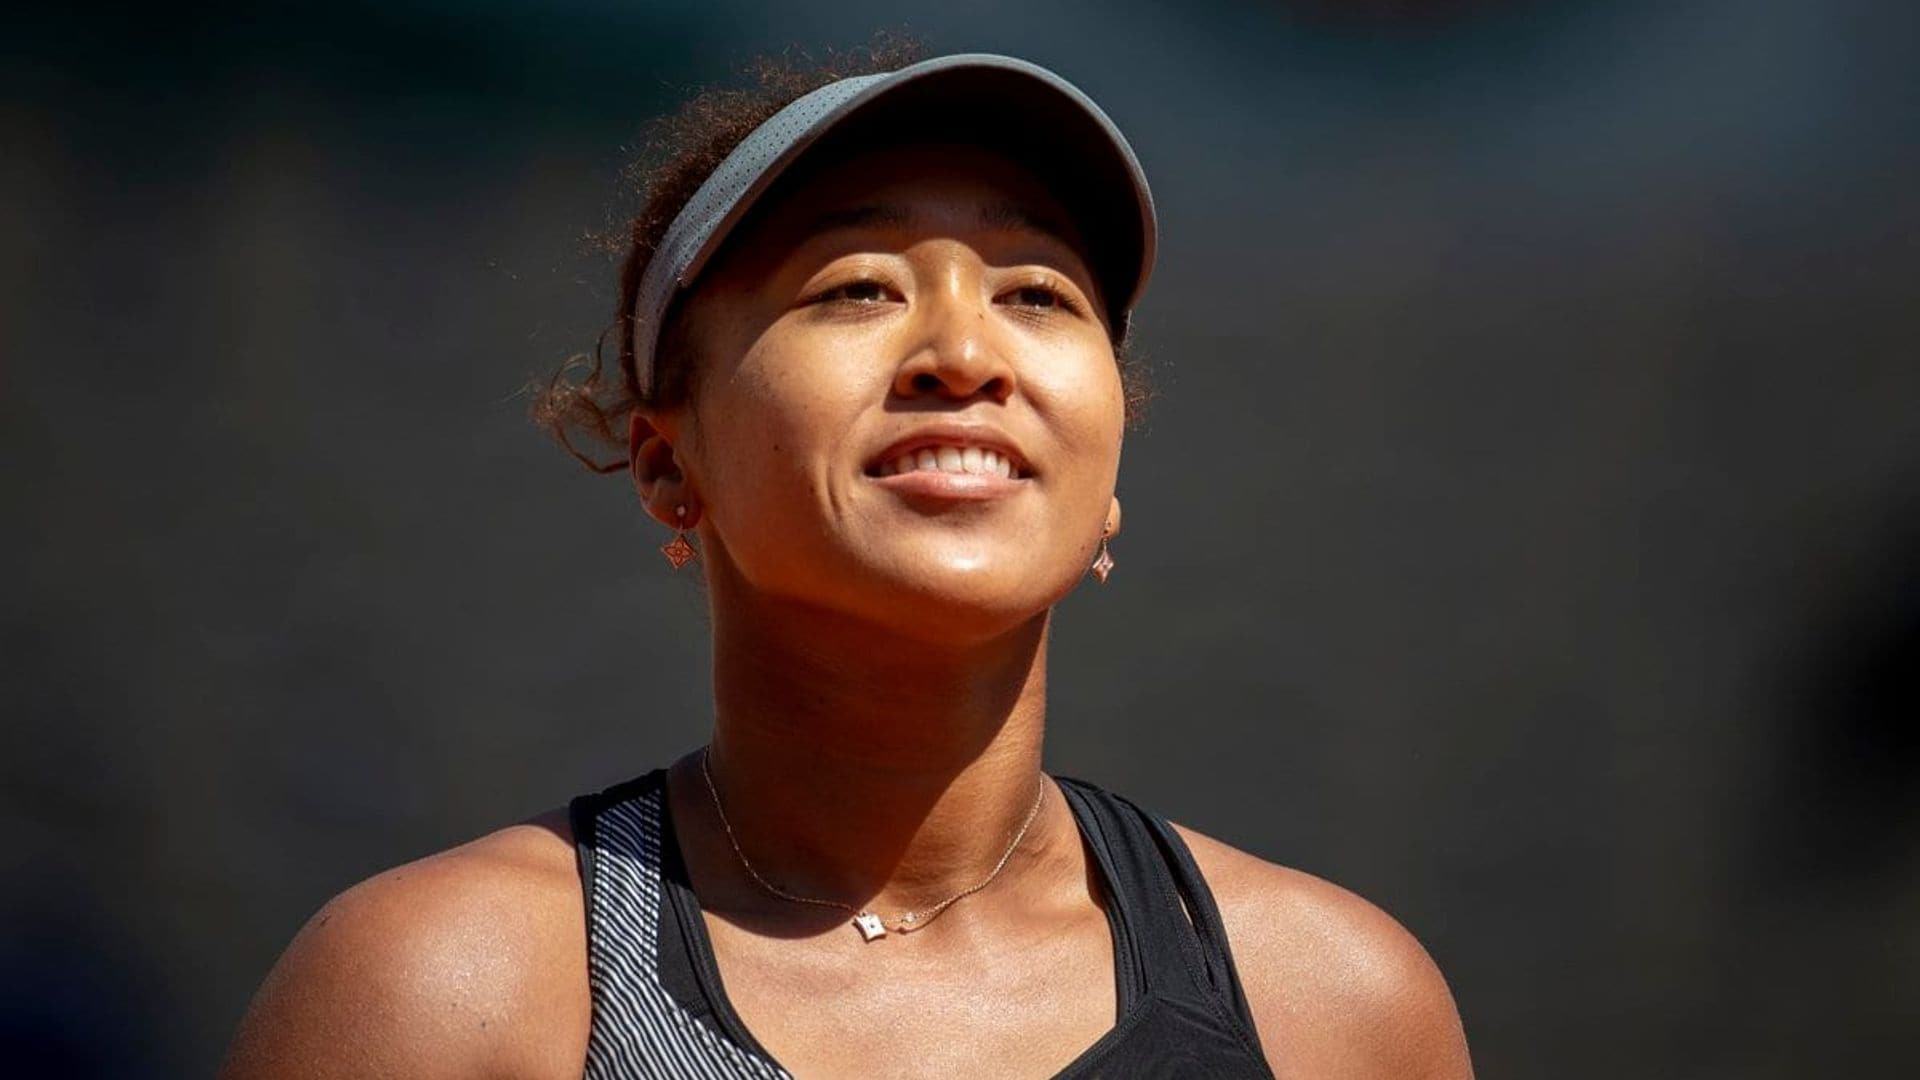 Naomi Osaka withdraws from Wimbledon but ‘will be ready’ for the 2021 Tokyo Olympics